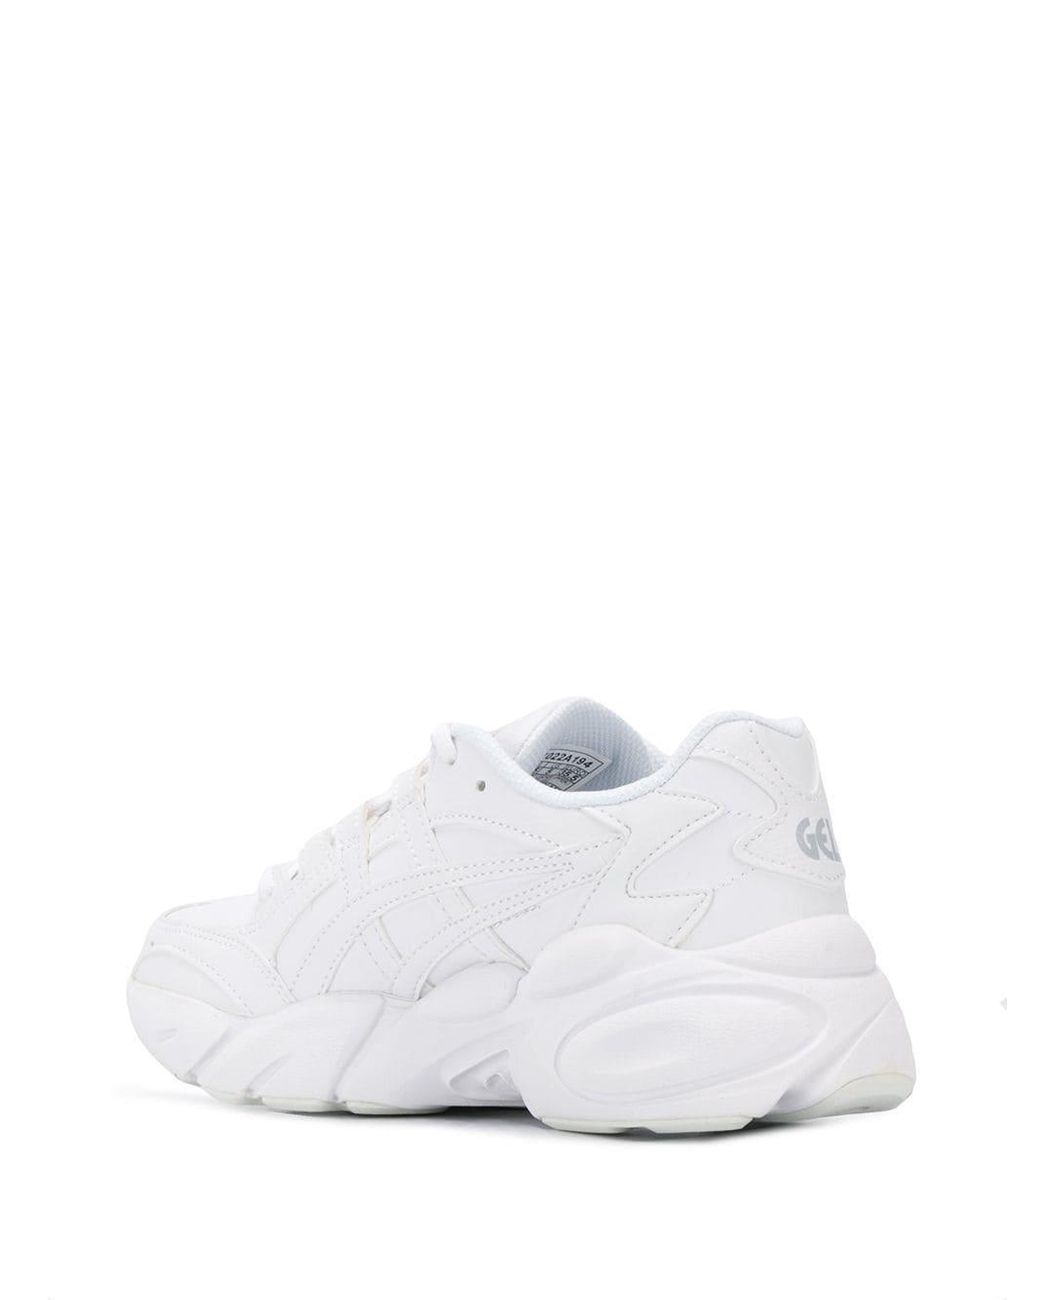 Asics Leather Chunky Low Top Sneakers in White | Lyst